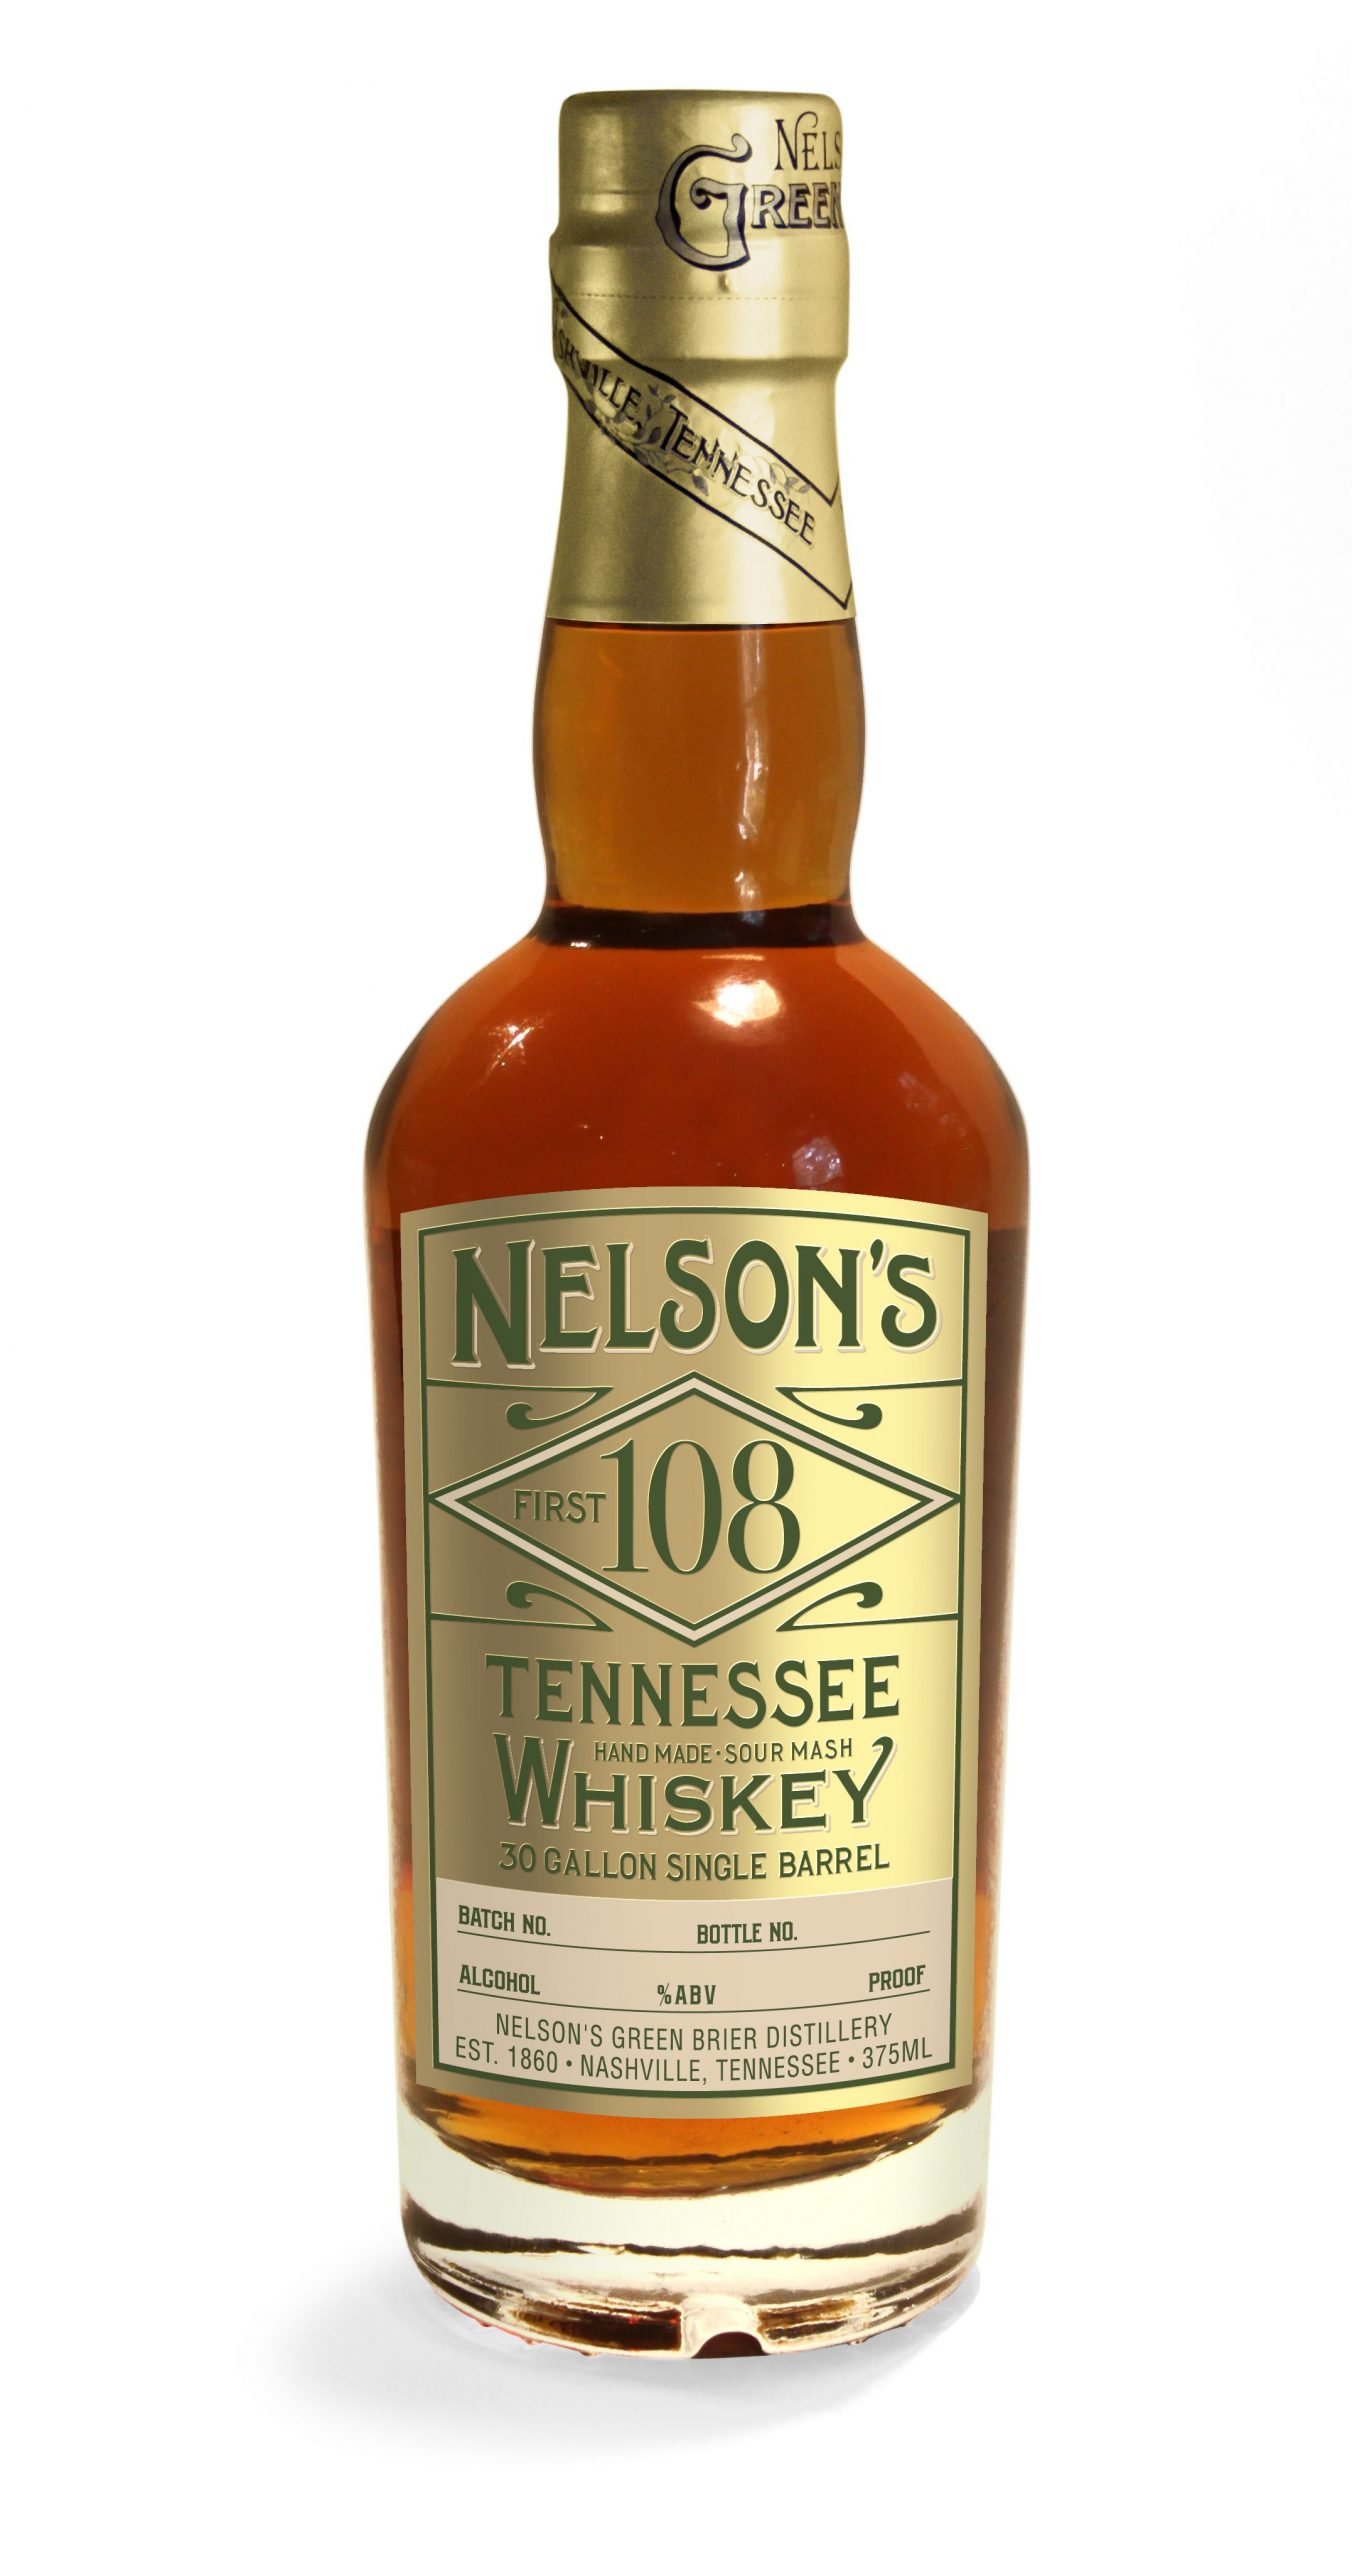 Nelsons Tennessee whisky.